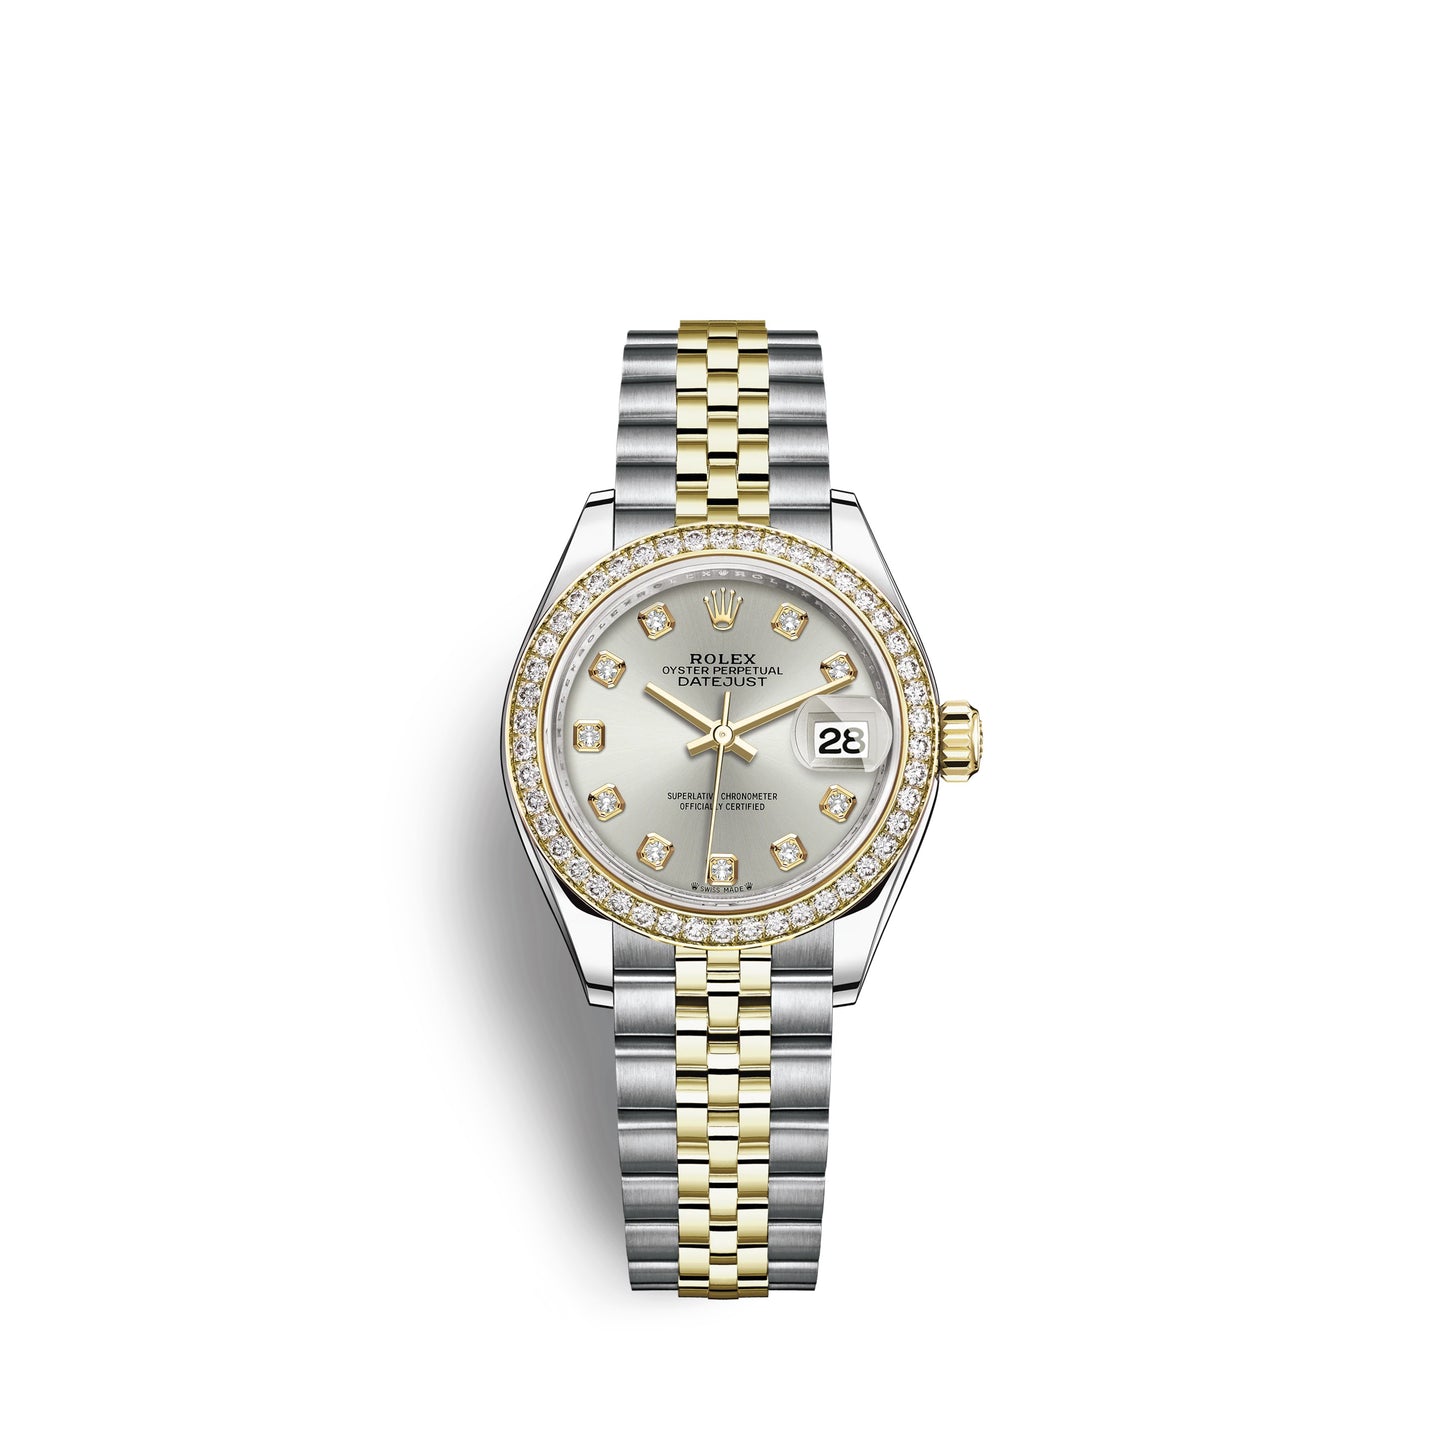 Rolex Lady-Datejust 28, Oystersteel and 18k Yellow Gold, Ref# 279383RBR-0007